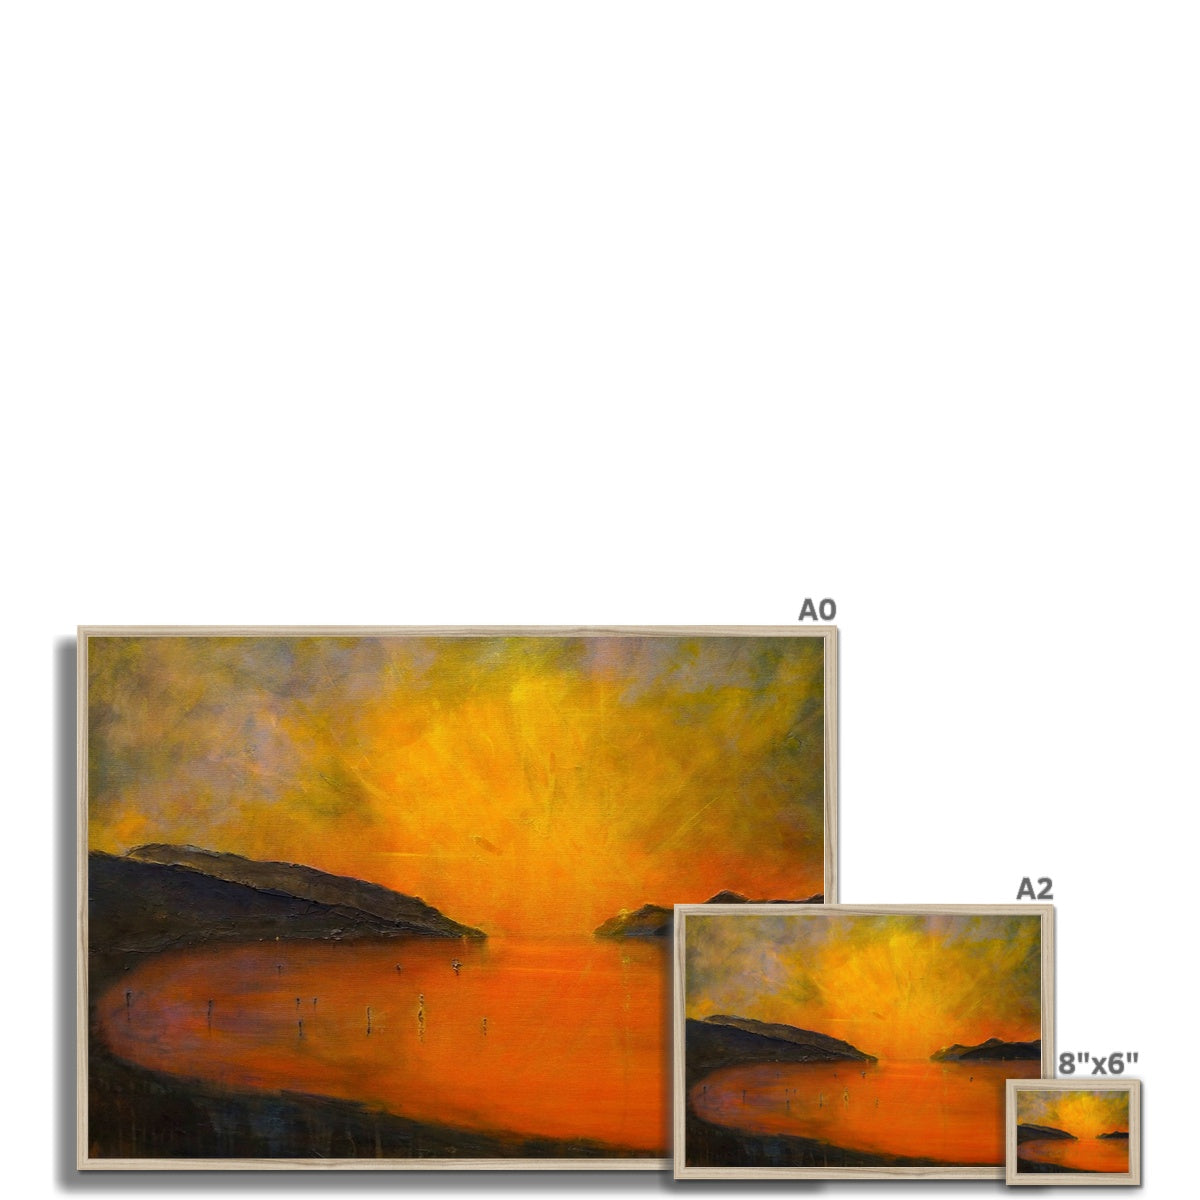 Loch Ness Sunset Painting | Framed Prints From Scotland-Framed Prints-Scottish Lochs & Mountains Art Gallery-Paintings, Prints, Homeware, Art Gifts From Scotland By Scottish Artist Kevin Hunter